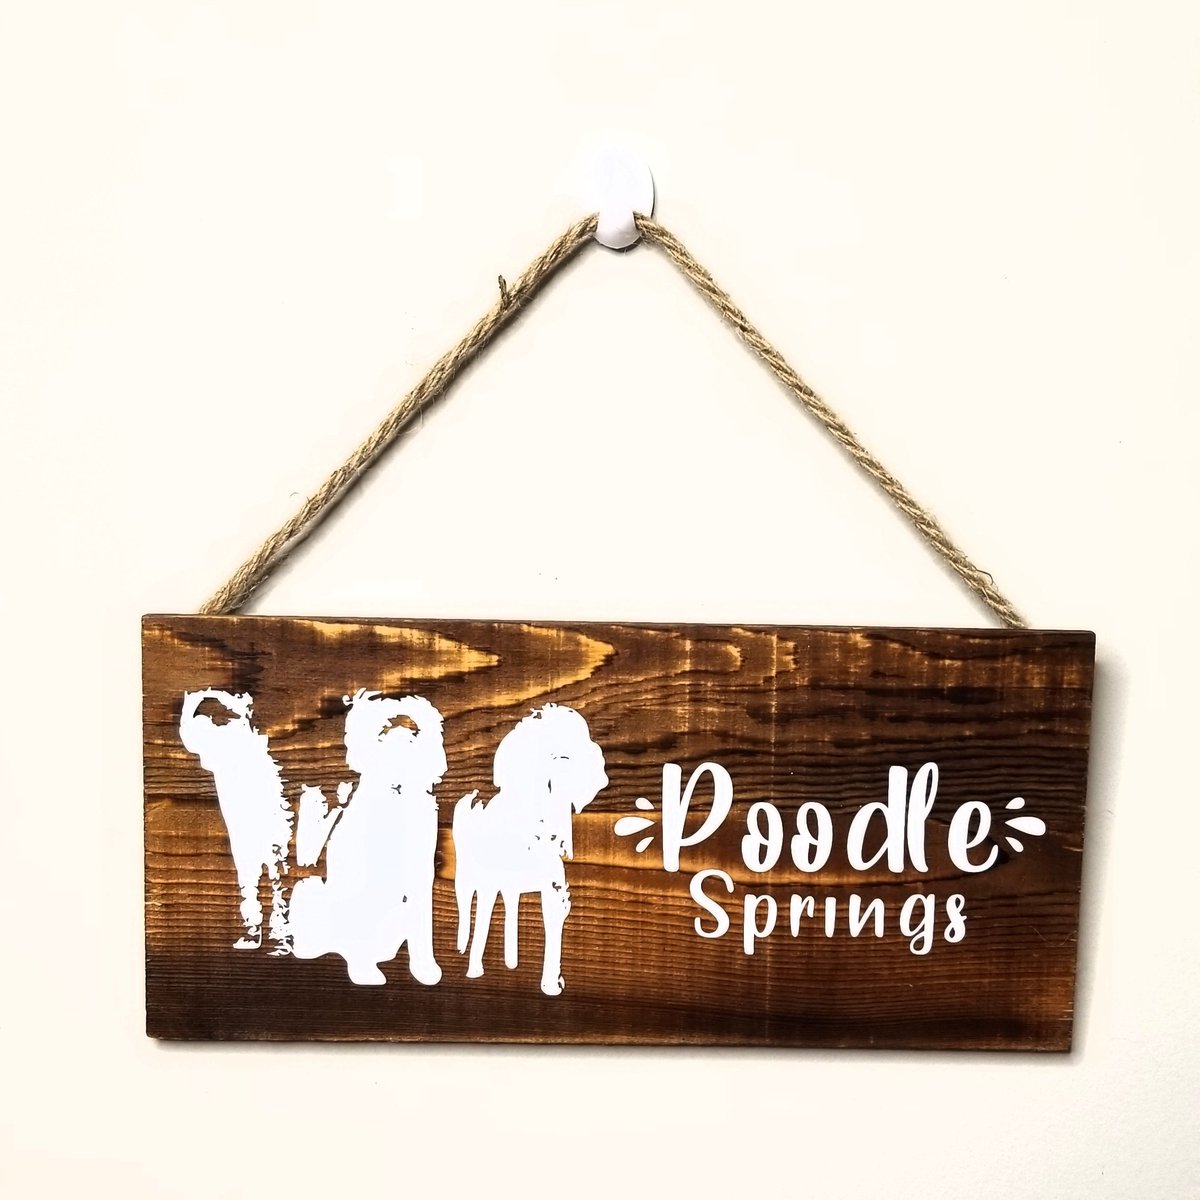 A special sign for a dear friend who lost his beloved poodles this year. #crafting #personalizedsigns #poodles